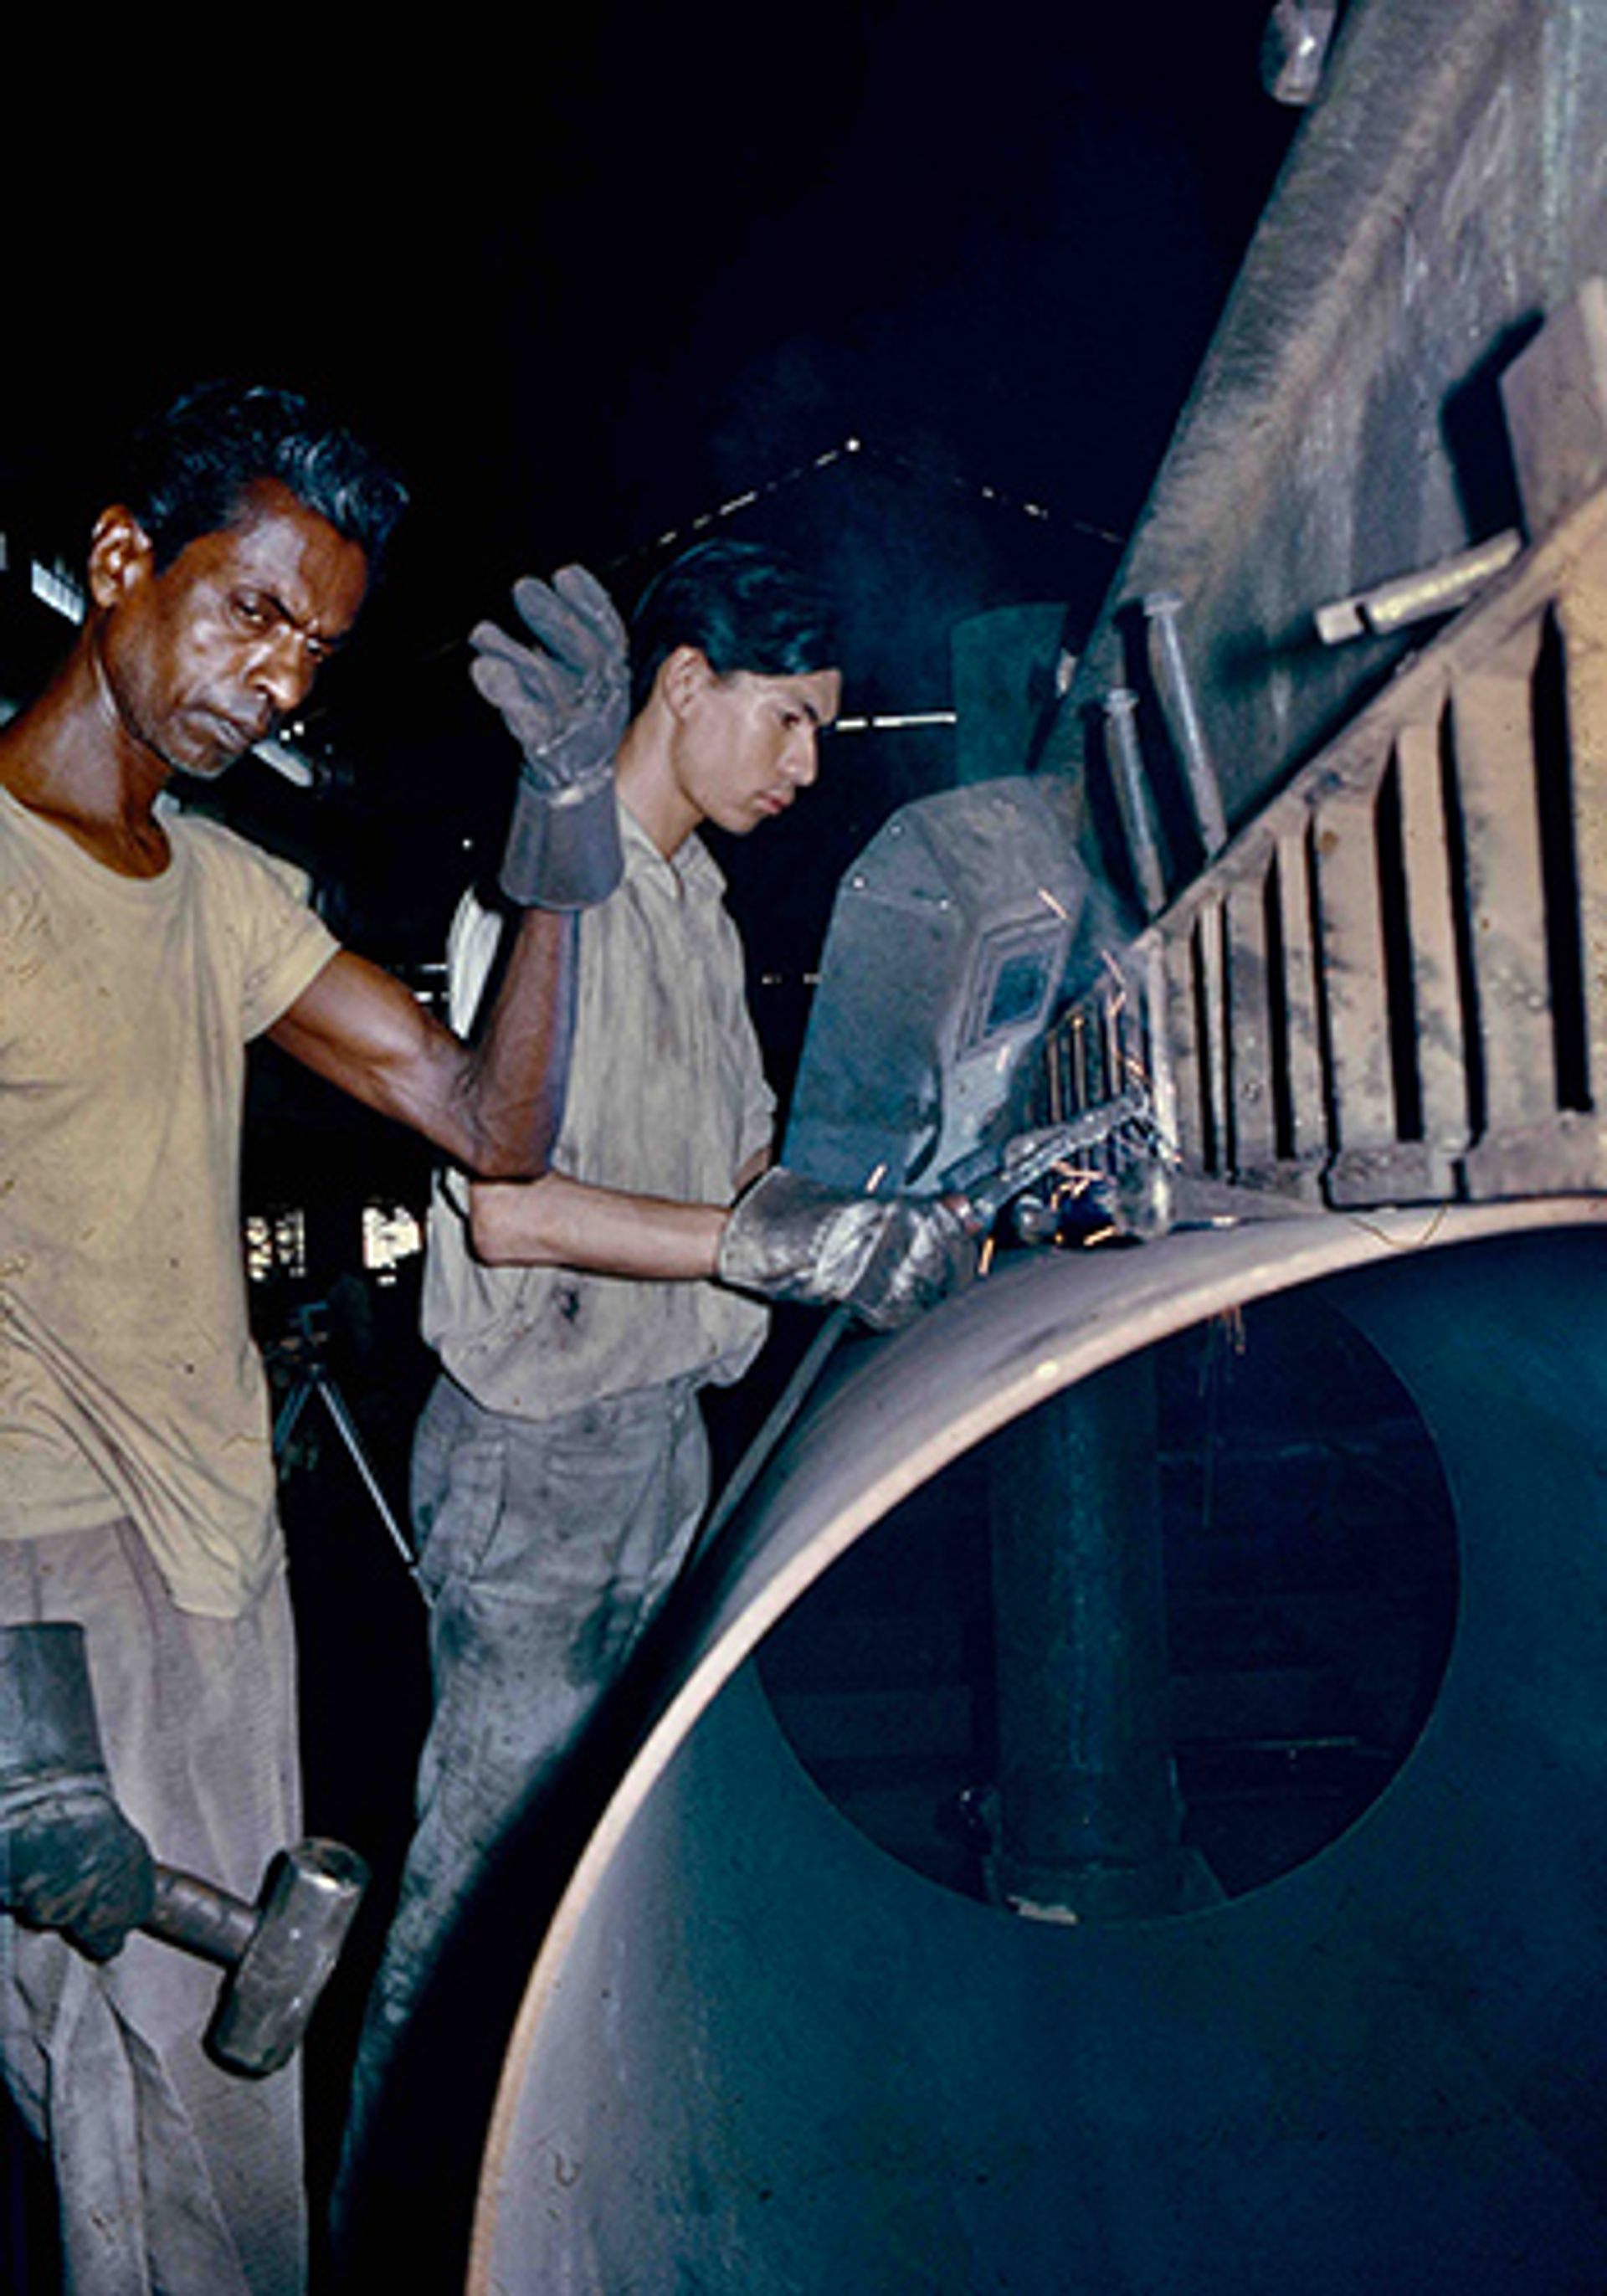 Two welders from Hume Industries at work, circa 1980.